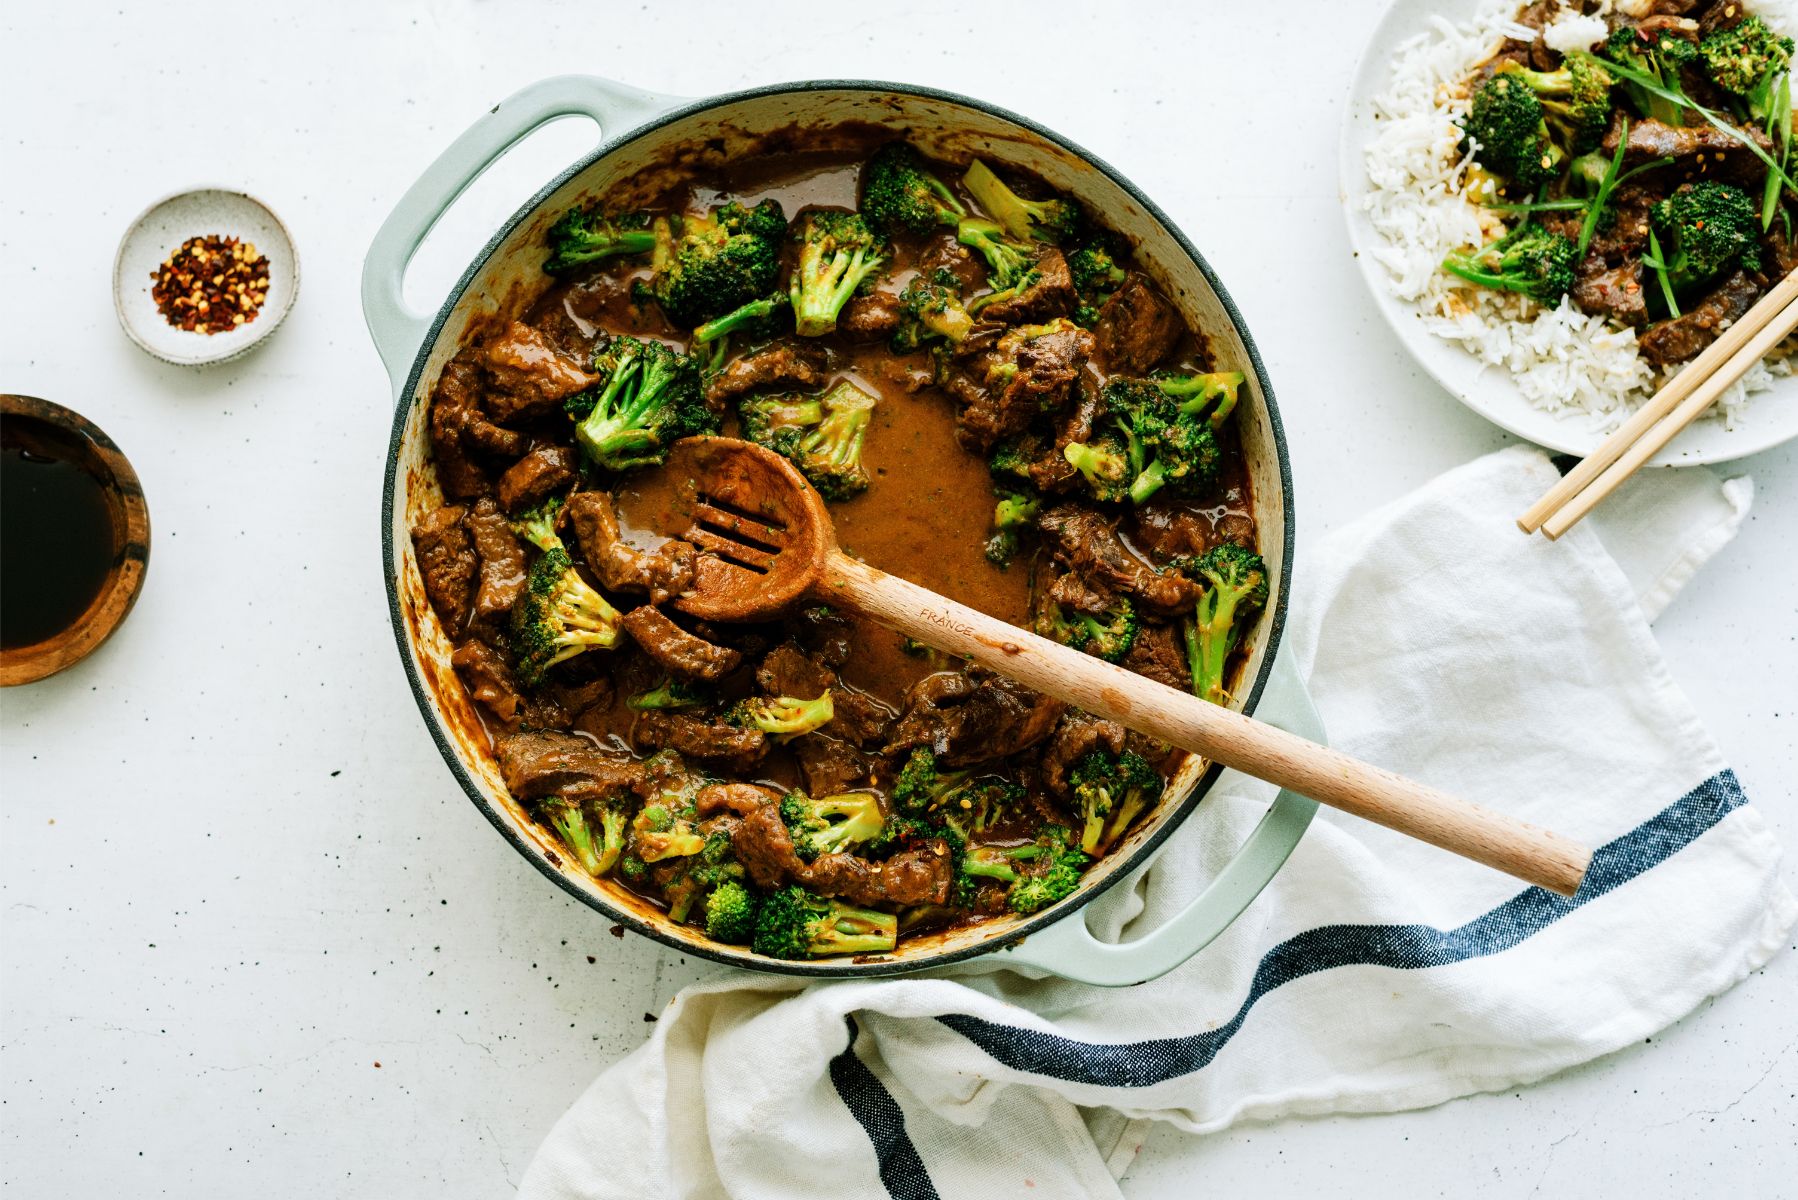 A pan of Beef and Broccoli with a plate on the side of rice, topped with Beef and Broccoli.